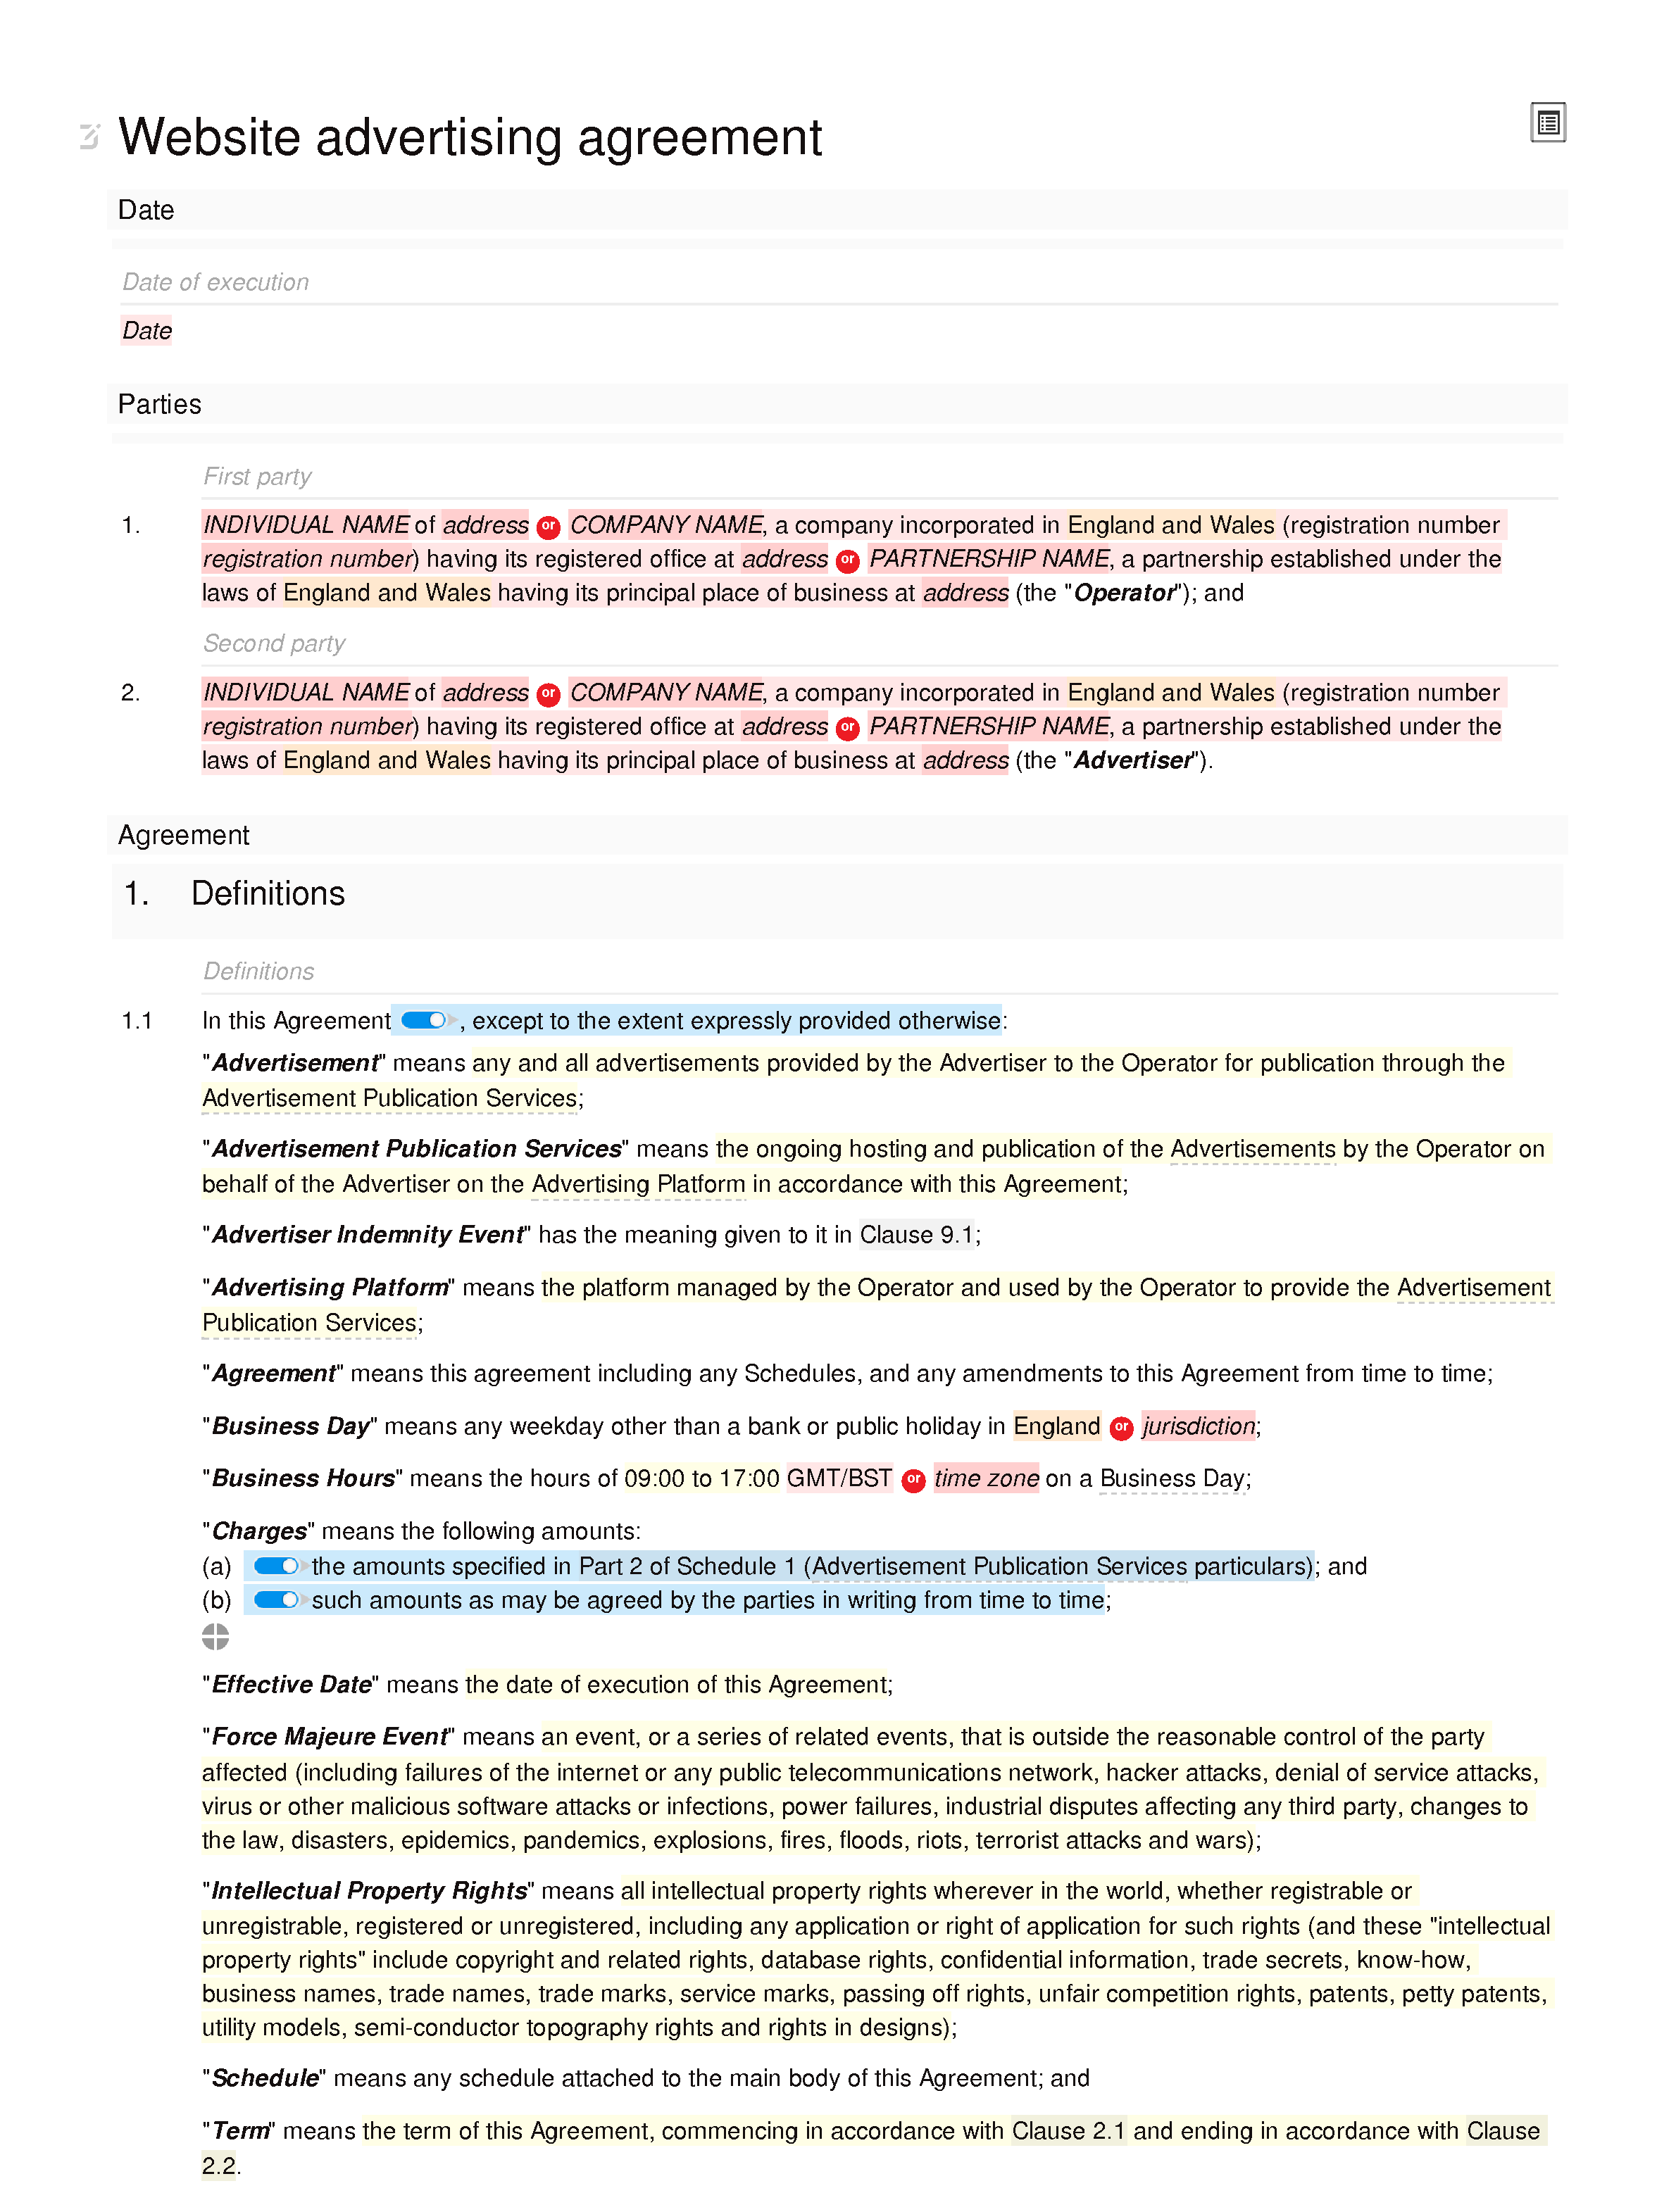 Website advertising agreement document editor preview